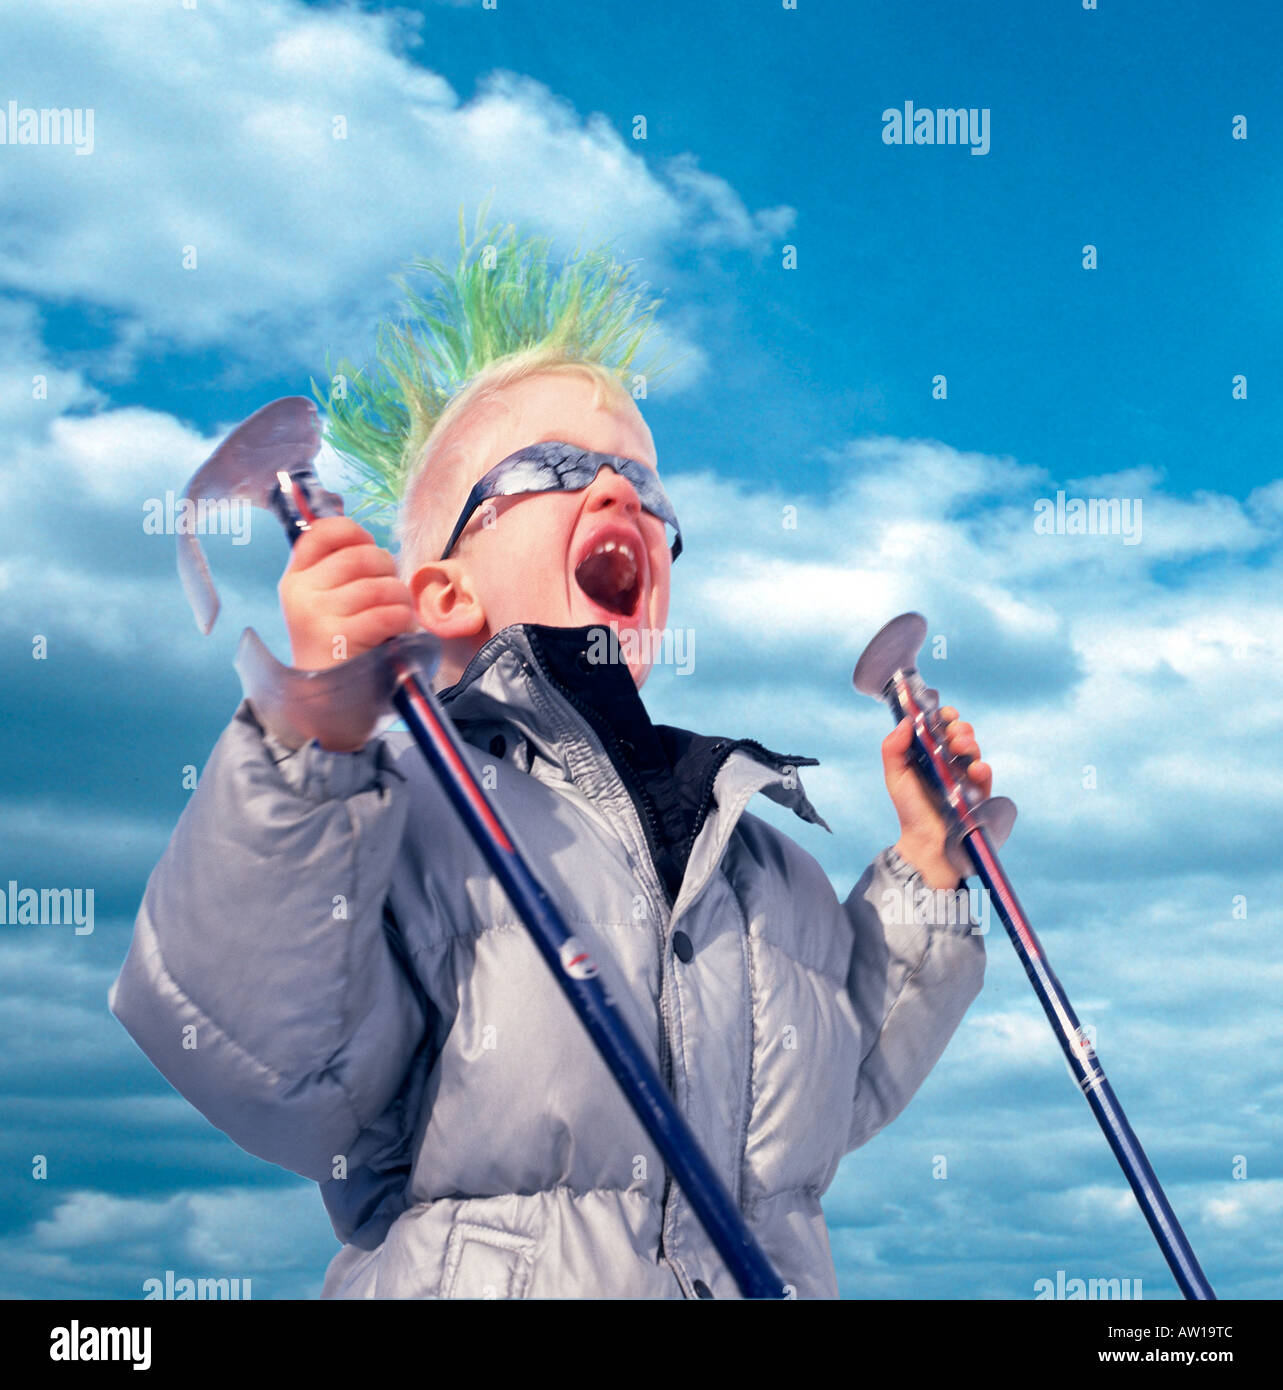 Young boy Screaming with Green Mohawk Haircut and Ski Poles Stock Photo